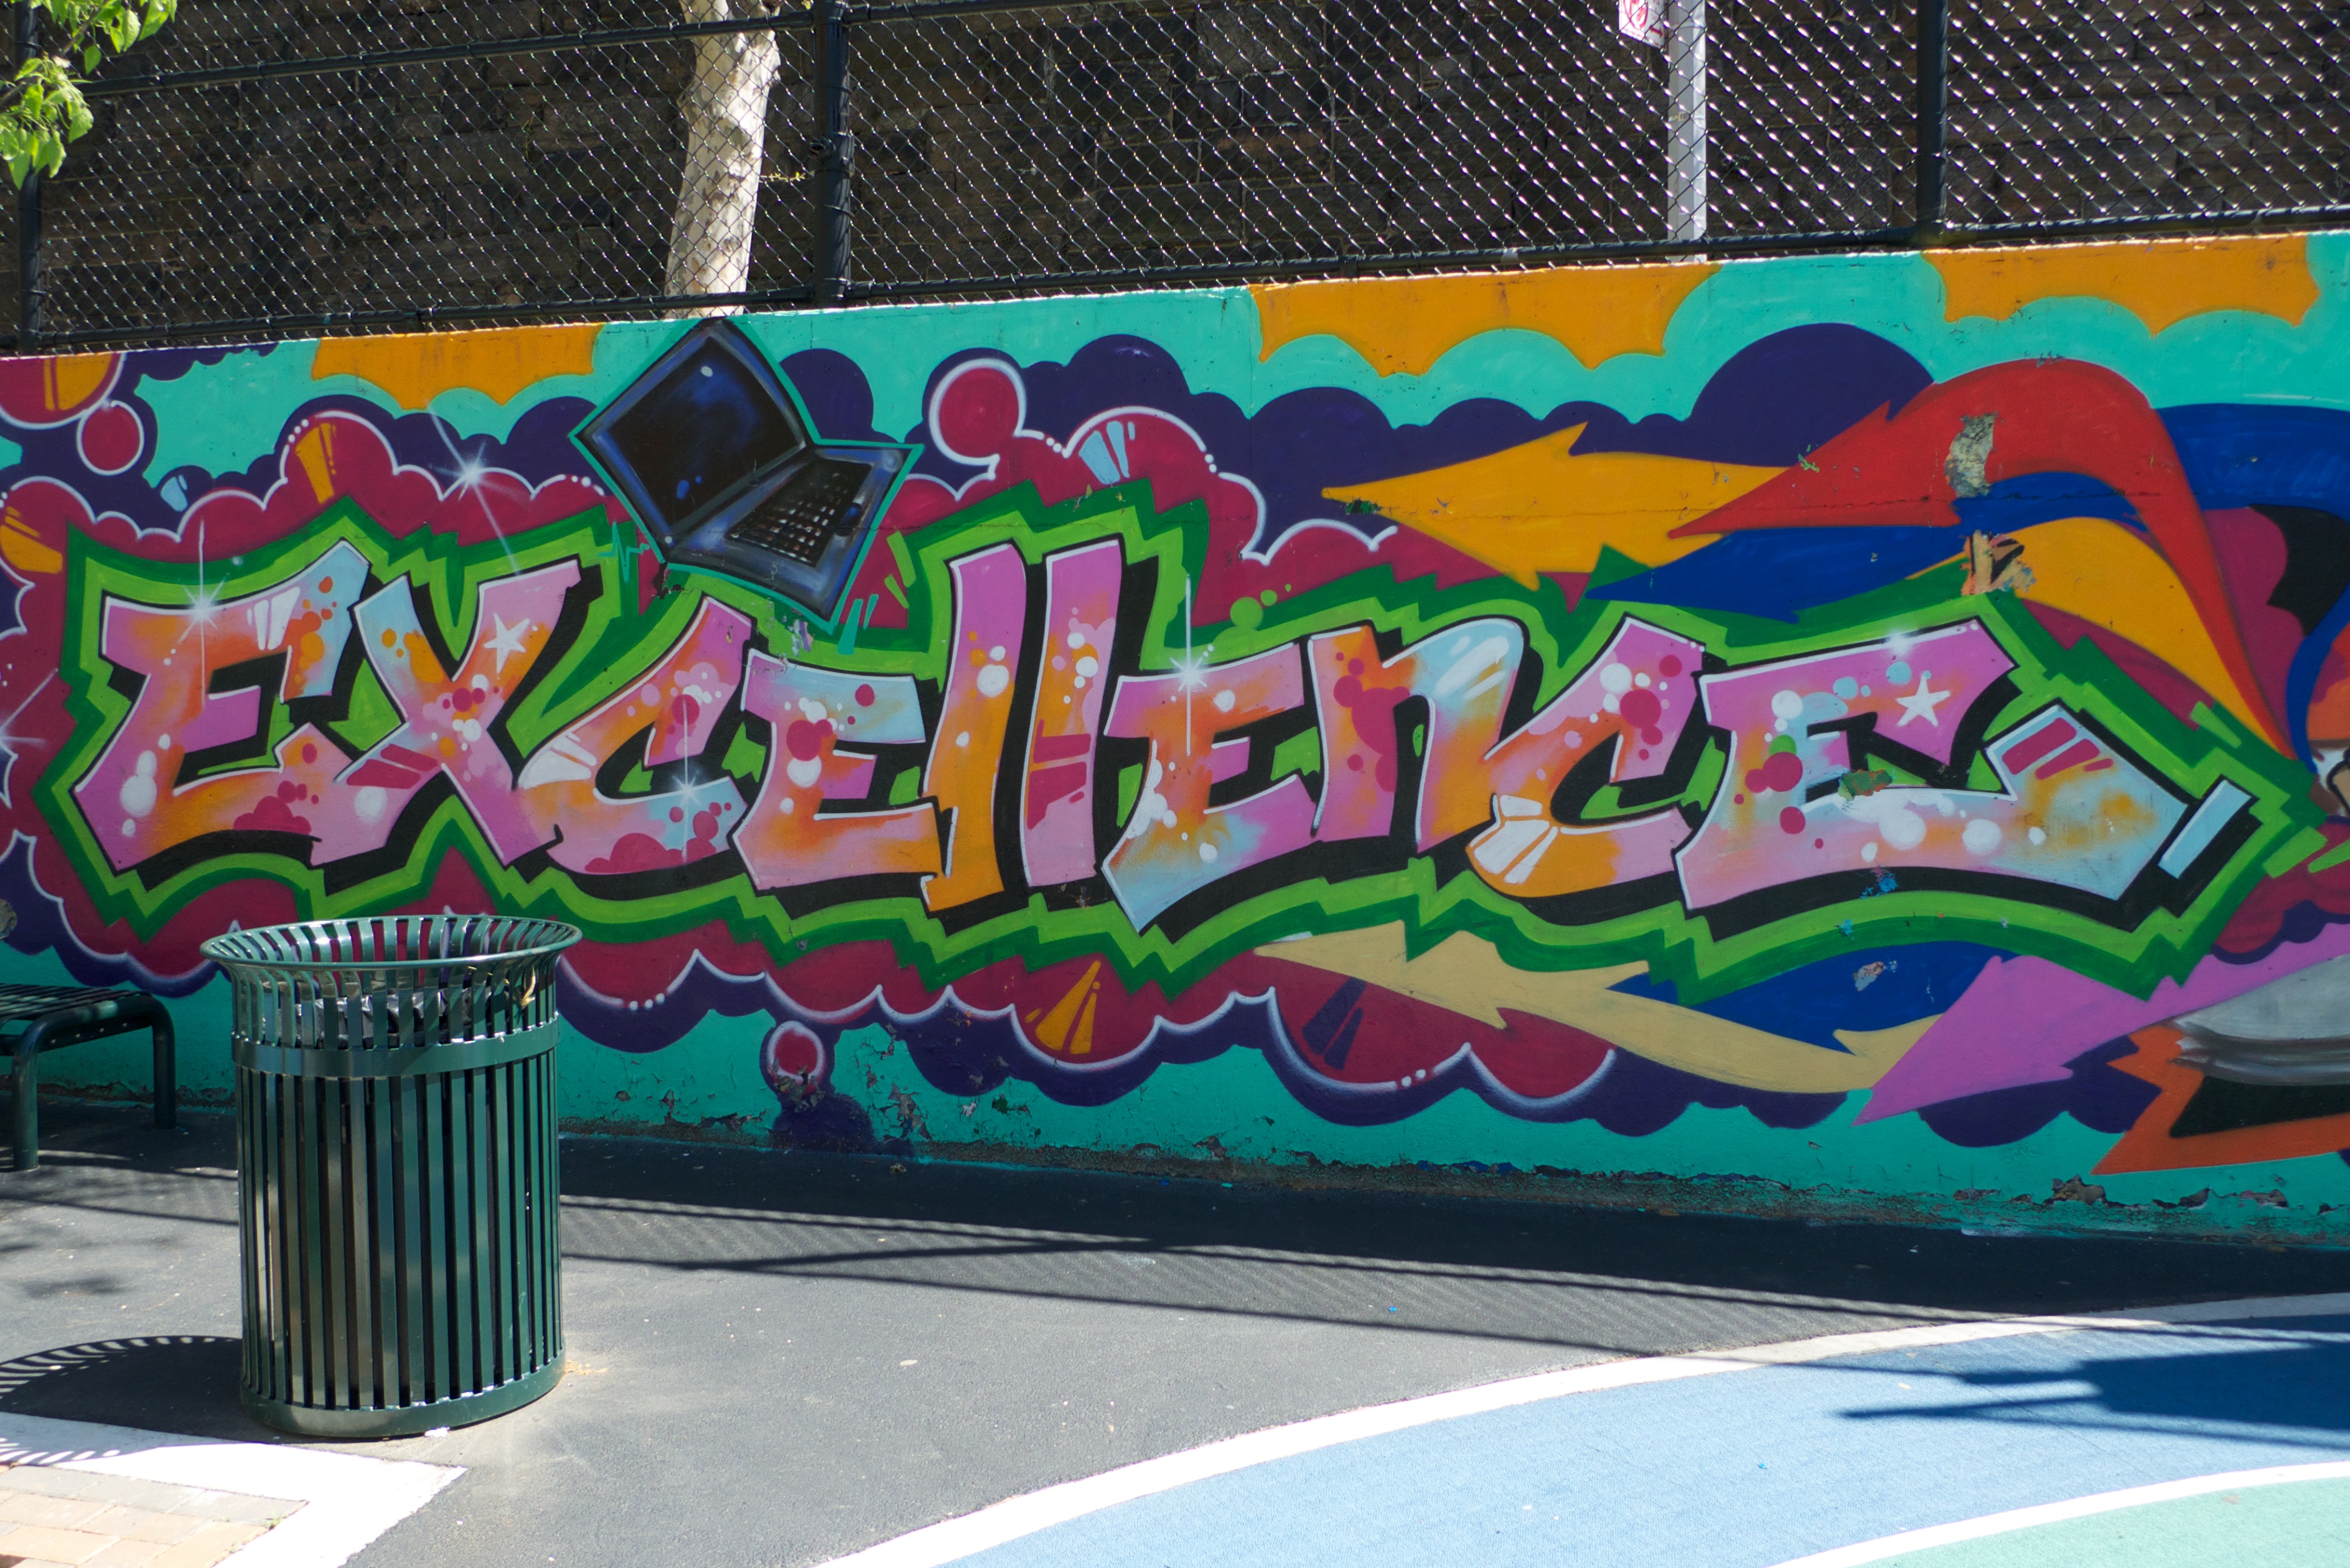 Graffiti Wall Of Fame Nyc Is A Awesome Images Pictures Of Graffiti ...